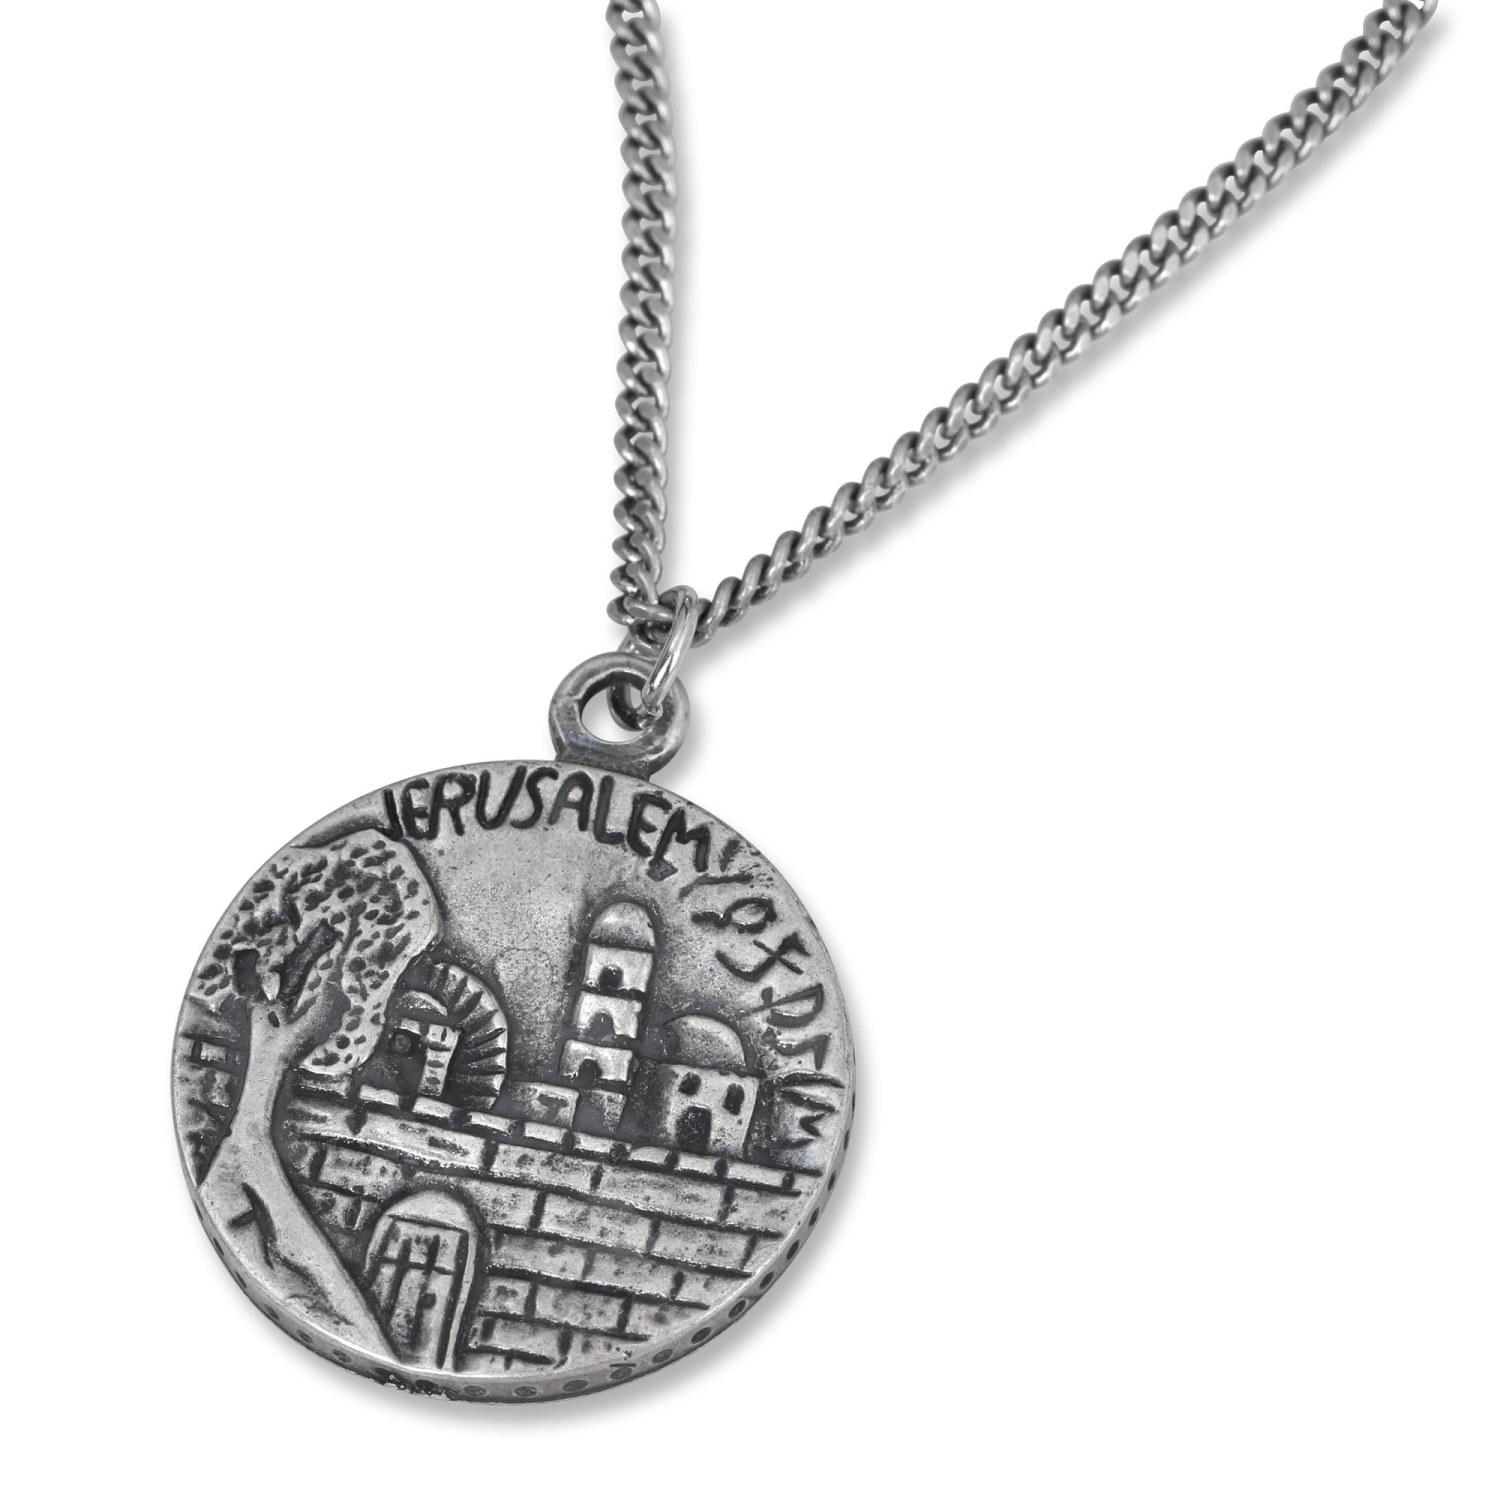 Galis Jewelry Blackened Silver Plated Jerusalem Disk Men's Necklace - 3